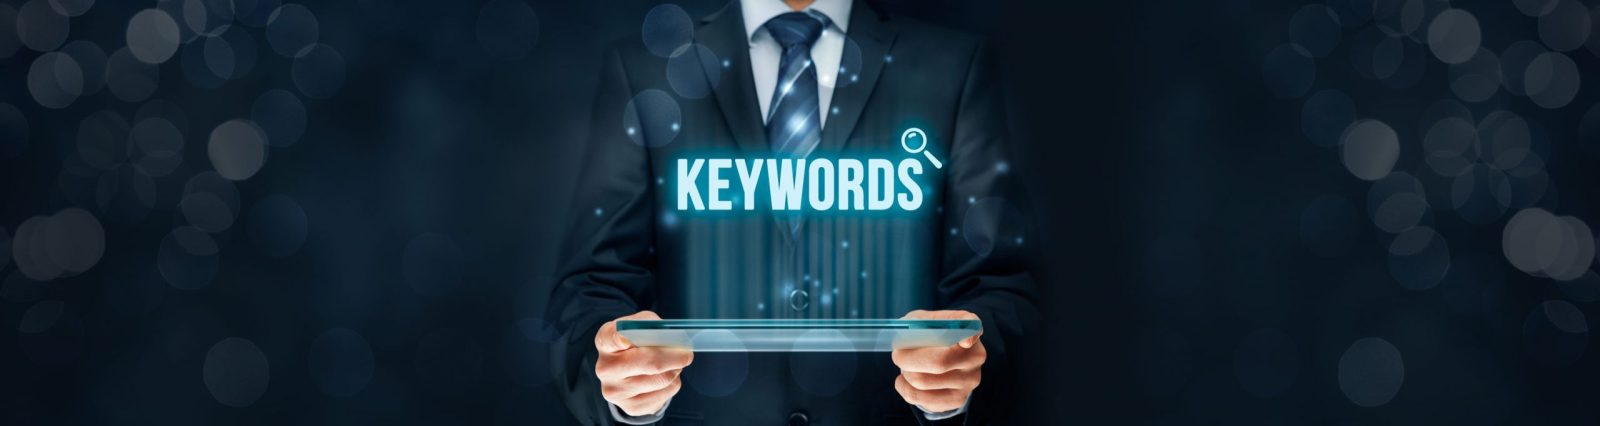 Smart Ways to Research Keywords for SEO